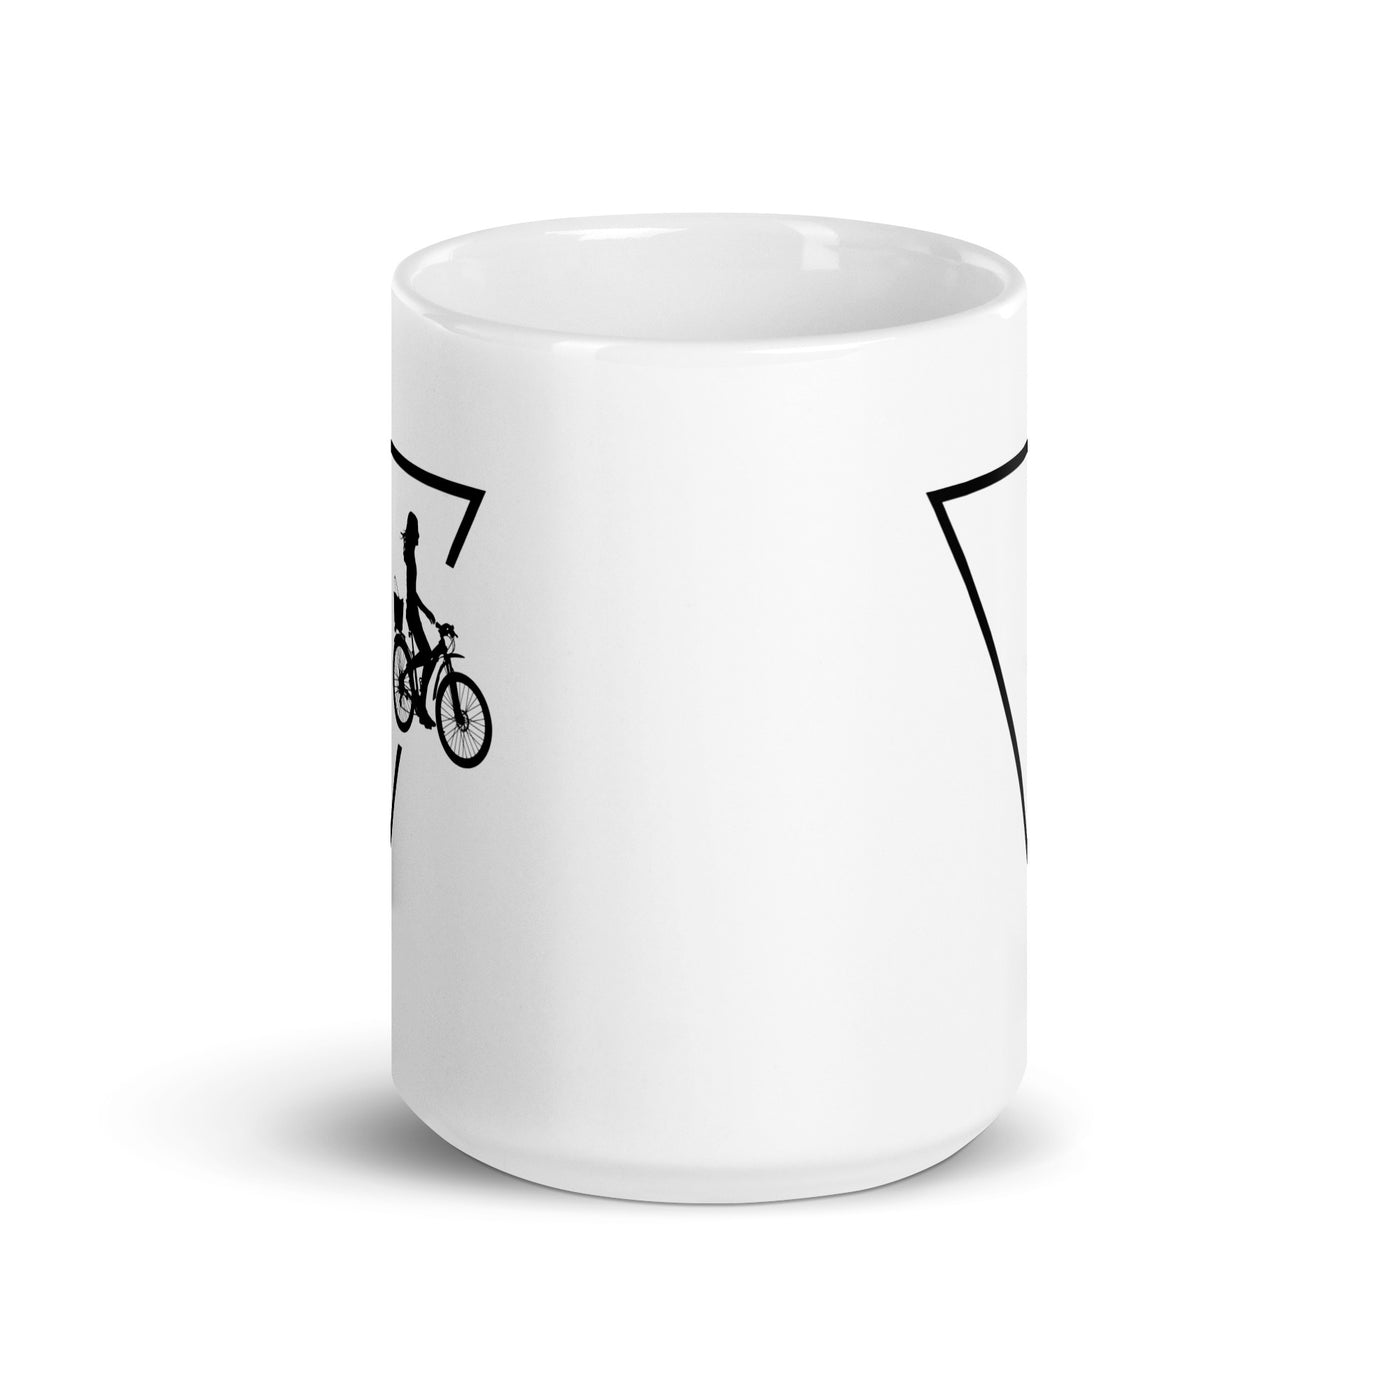 Triangle 1 And Cycling - Tasse fahrrad